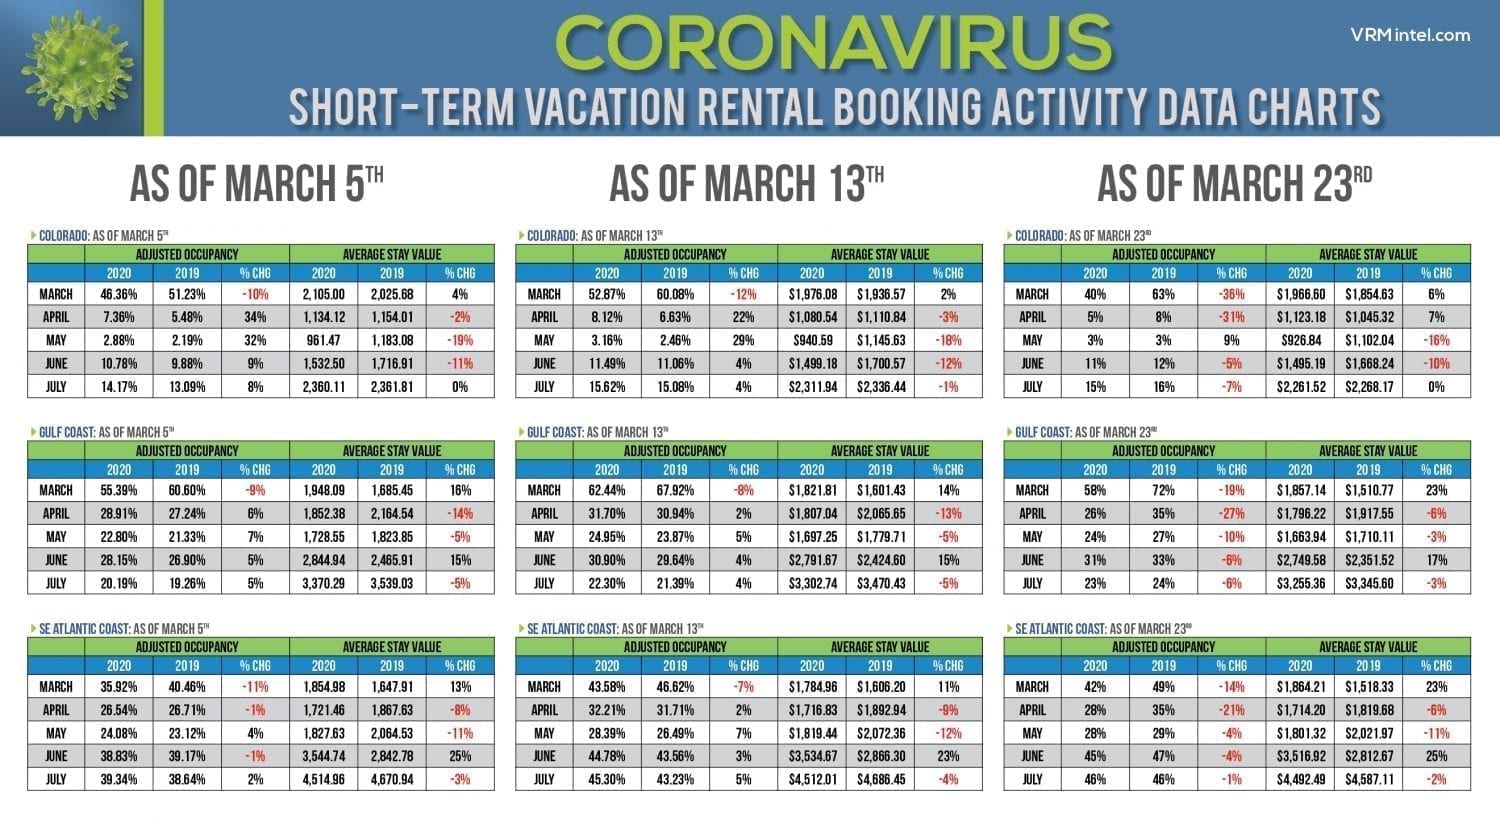 Vacation rental booking pace drops off due to coronavirus